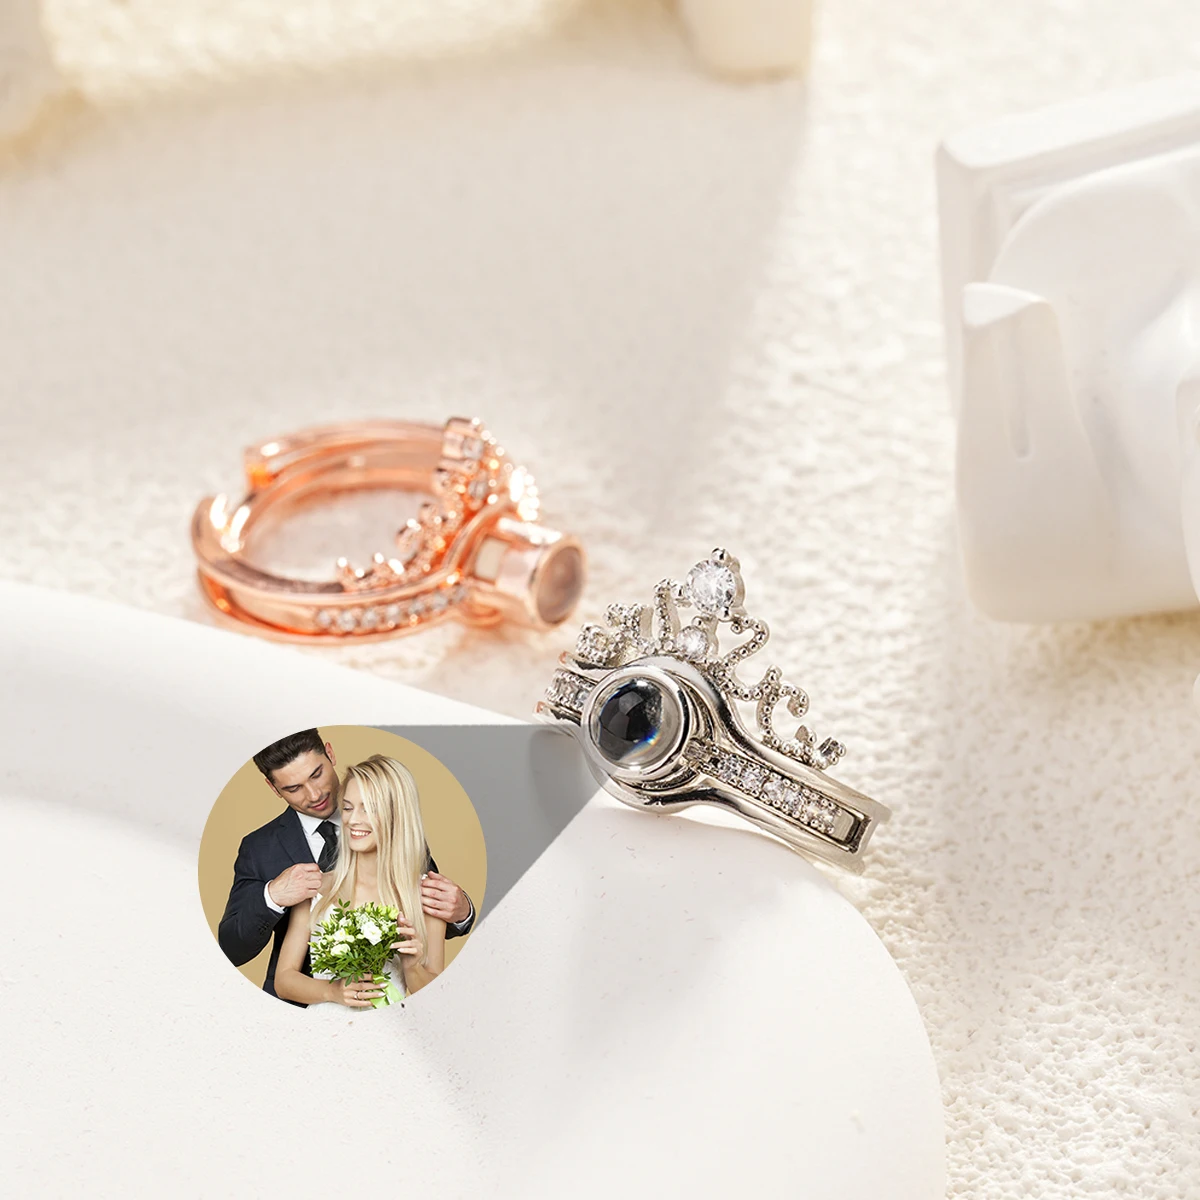 Crystal Crown Photo Custom Image Ring with Your Picture Family Memory Pet Personalized Projection Rings Valentine's Day Gift personalized name rings custom ring with birthstone for women stainless steel jewelry adjustable rings family unique gift